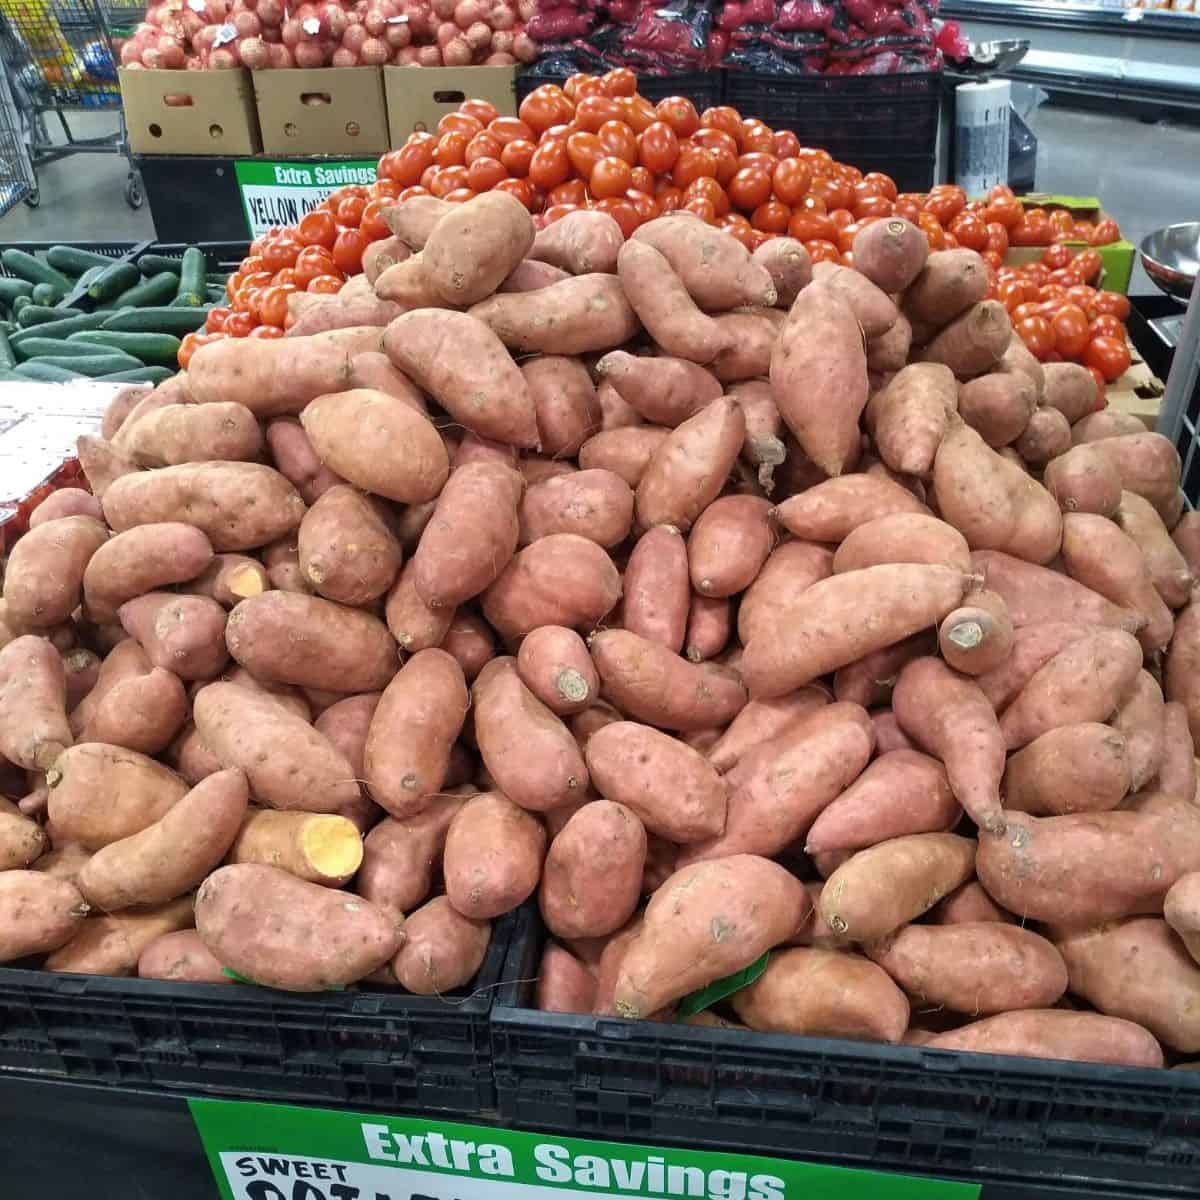 A large grocery store display stocked high with sweet potatoes.